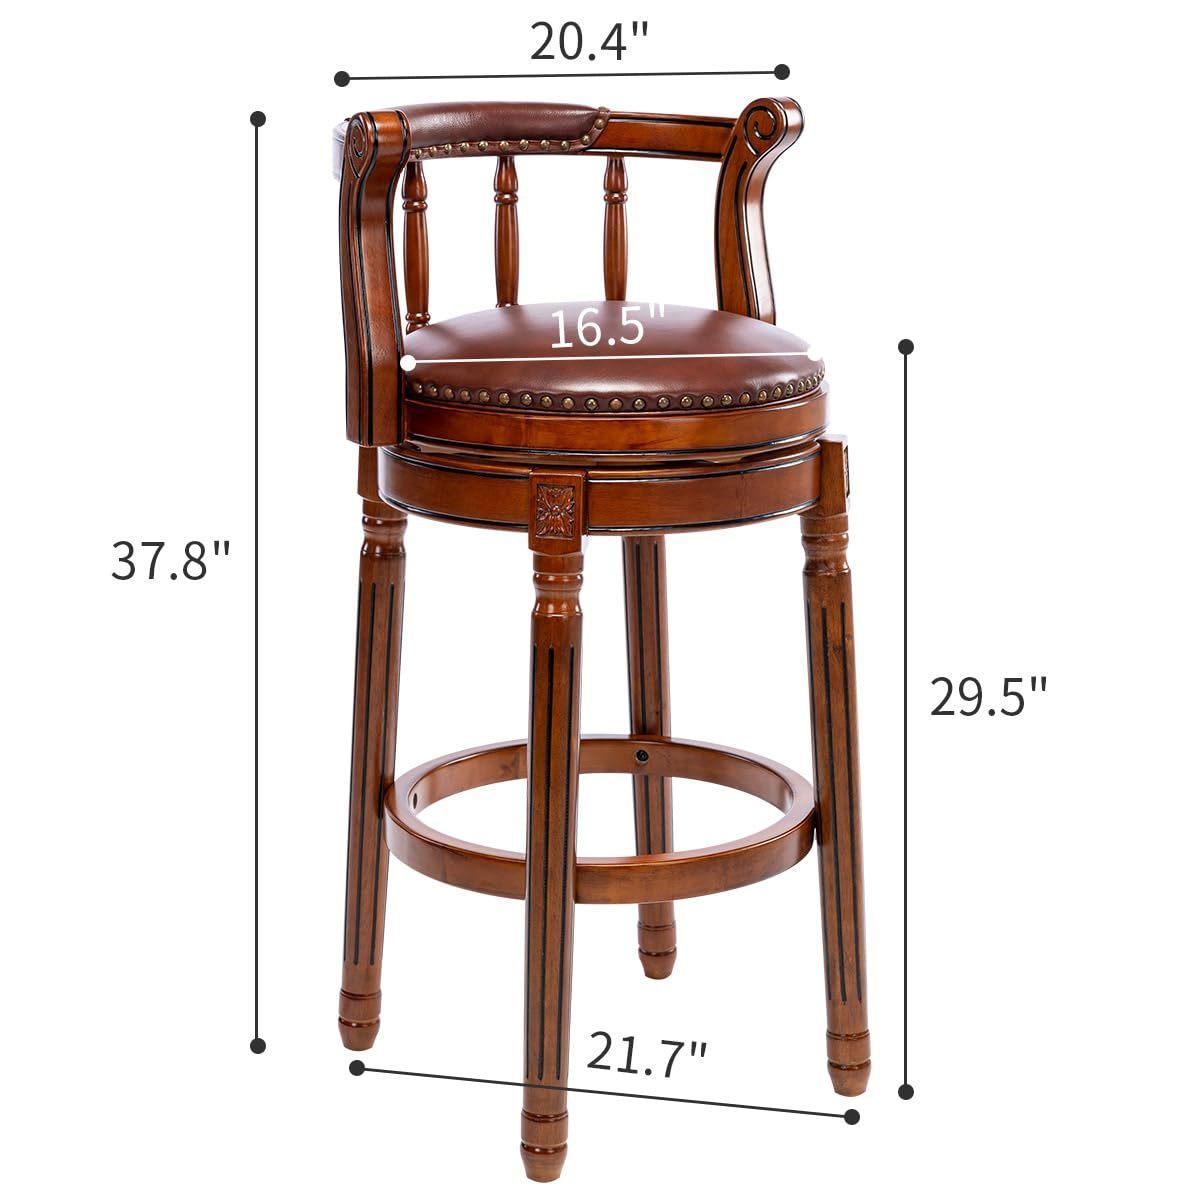 Seat Height 29.5'' Wooden Swivel Barstool 360 Degrees Swivel Barstools Chair for Home Kitchen Counter 1pc (Brown)